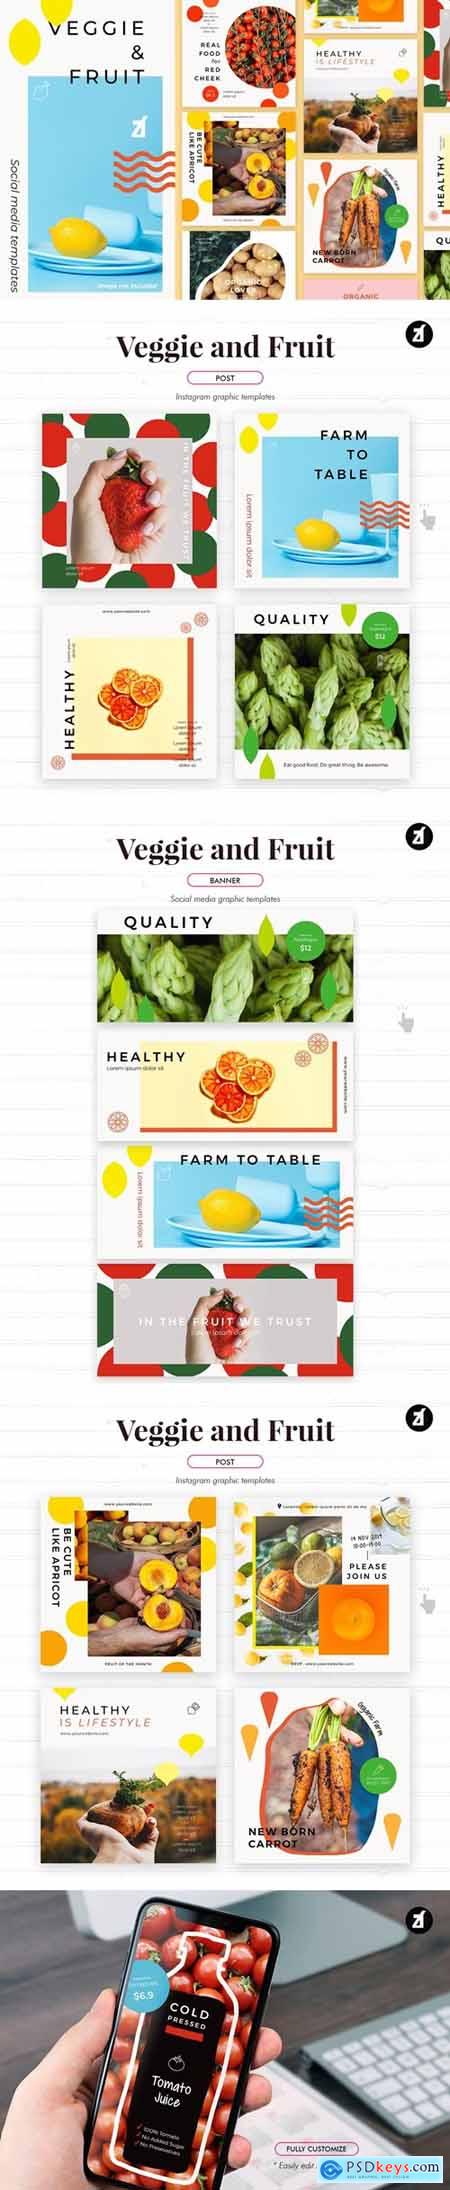 Veggie and fruit social media graphic templates